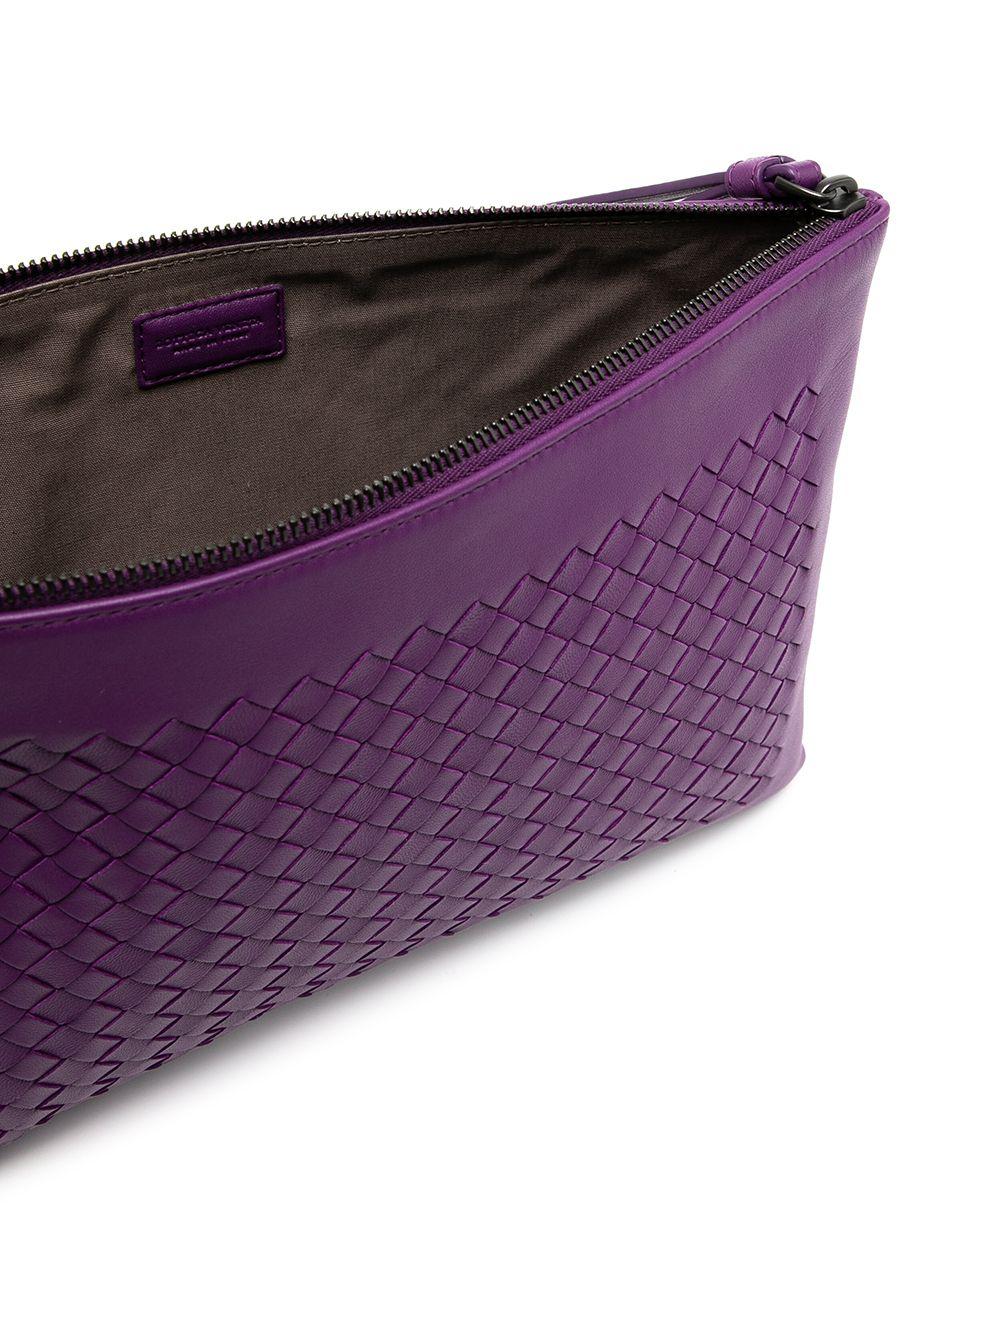 Designed by Bottega Veneta in the late 60, the intrecciato weave is instantly recognisable and timeless. This pre-owned purple pouch features a slimline profile, a zip fast opening and offers ample storage space for all necessities. Slip your hand